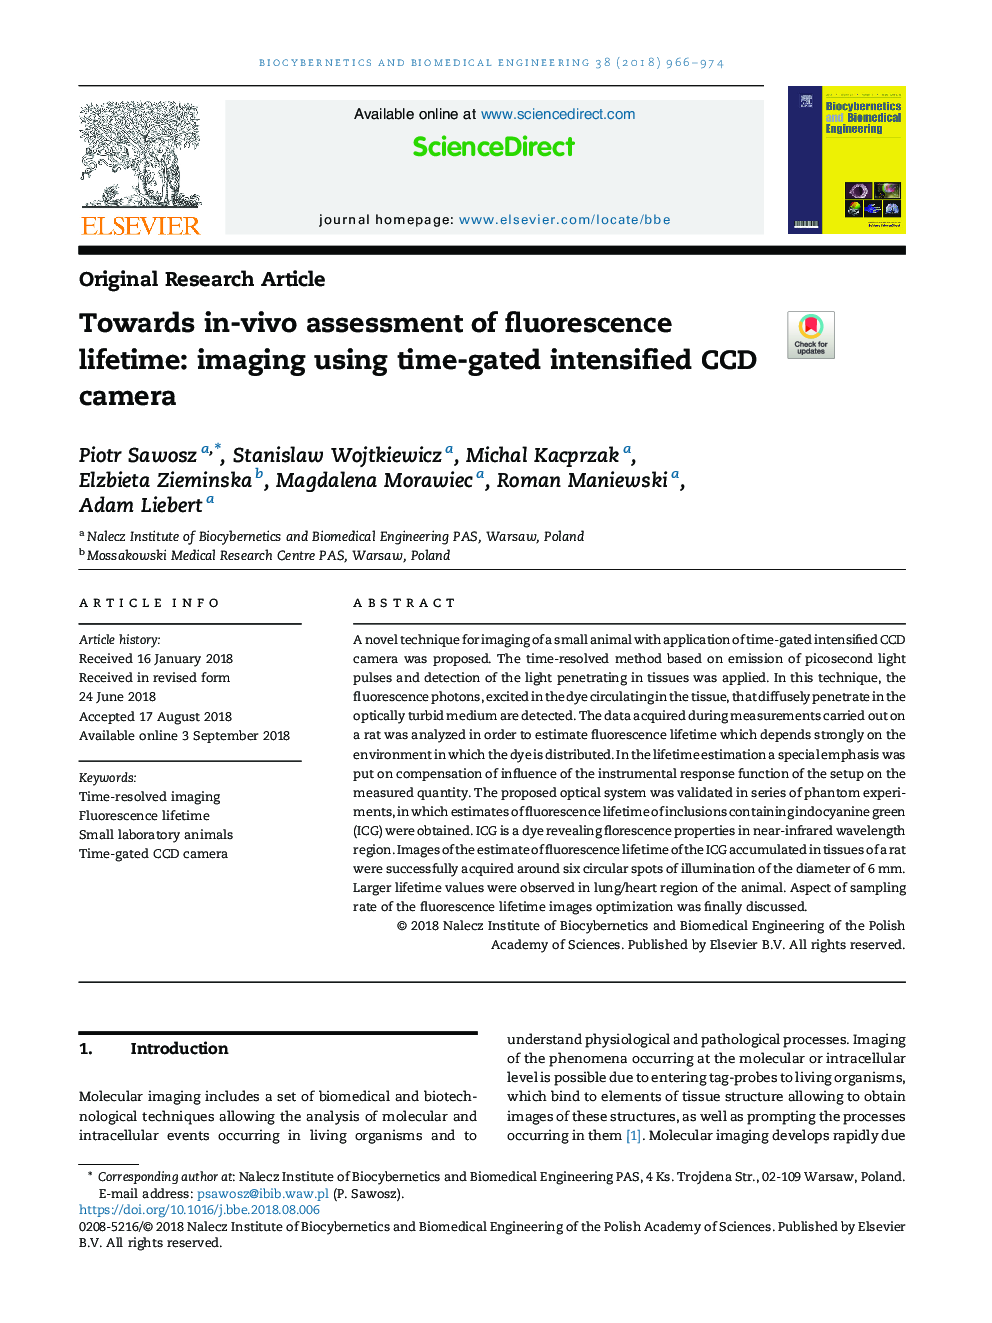 Towards in-vivo assessment of fluorescence lifetime: imaging using time-gated intensified CCD camera